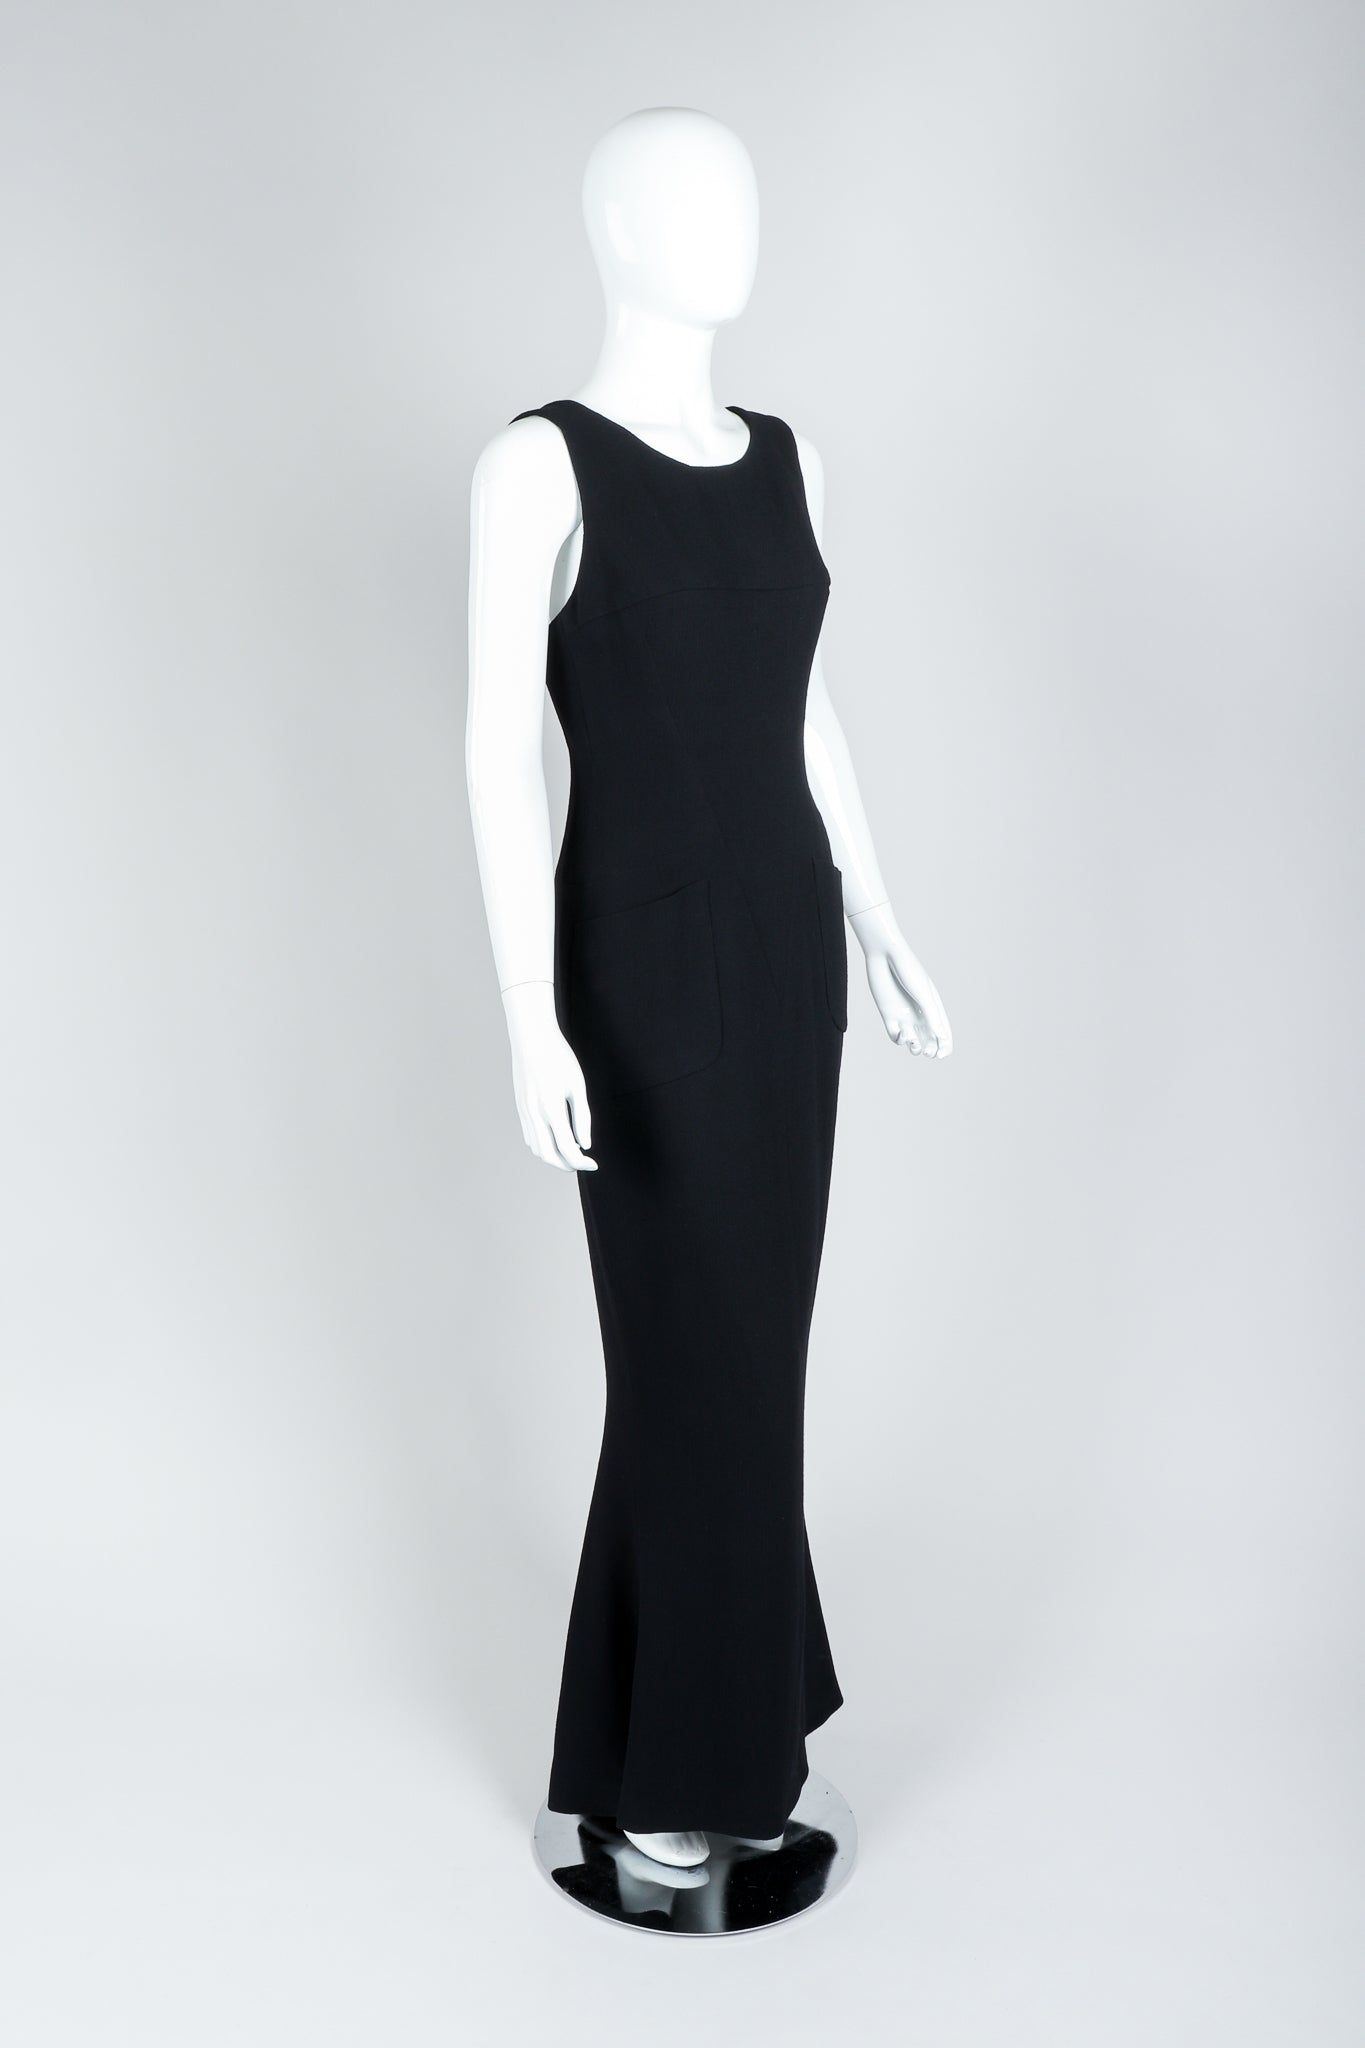 Vintage Chanel Breakfast At Tiffany's Style Black Fishtail Gown on Mannequin, Side